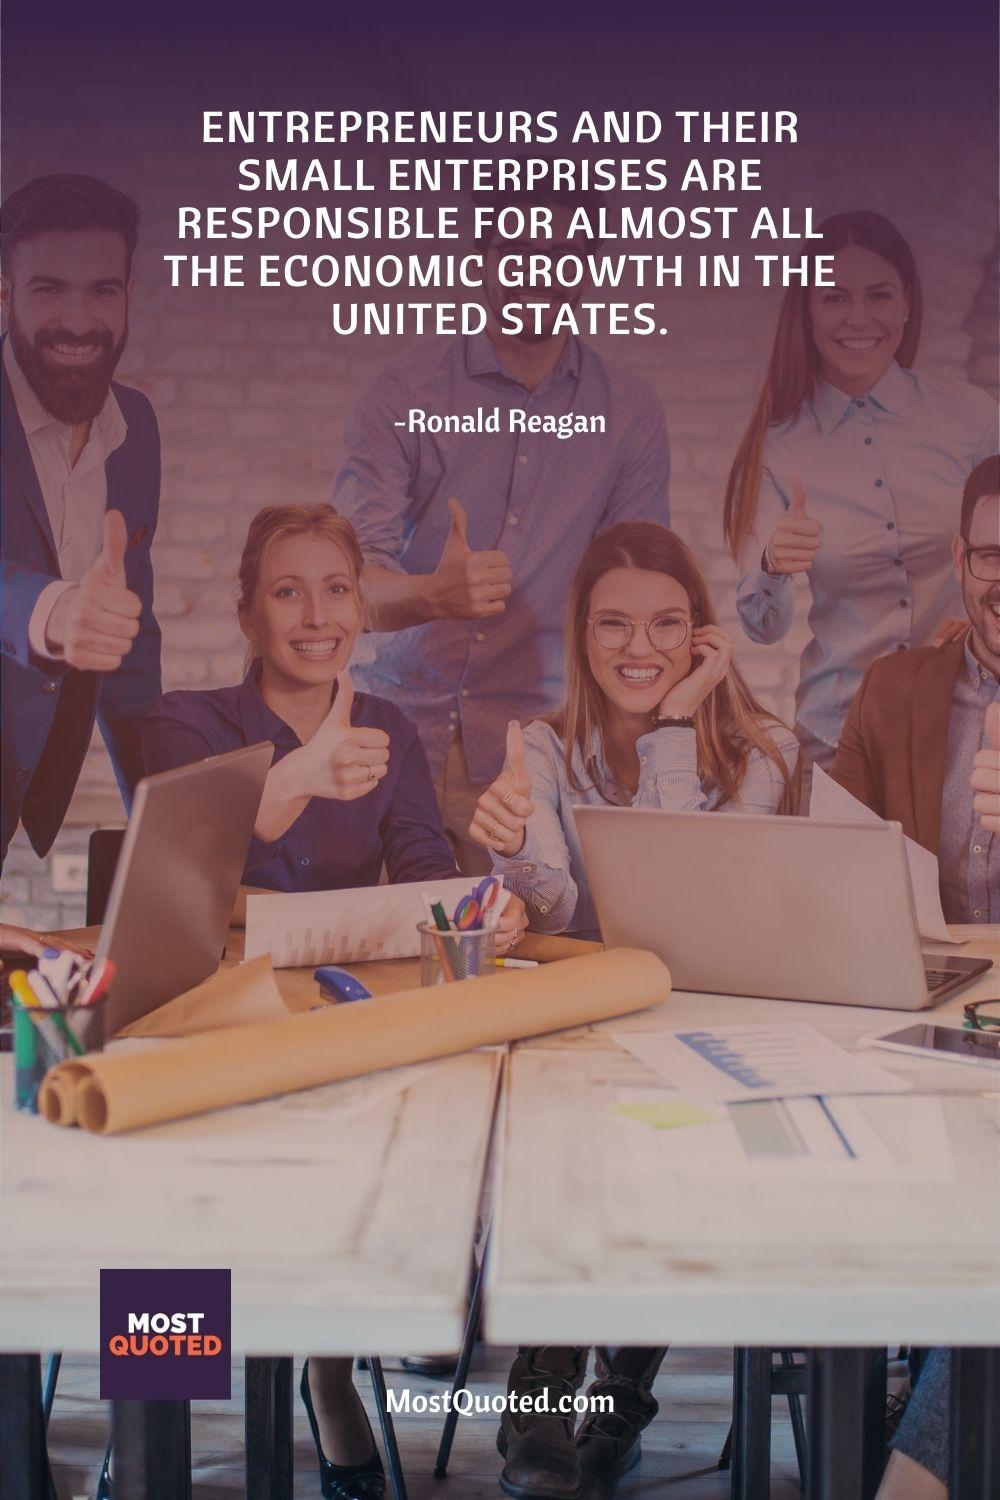 Entrepreneurs and their small enterprises are responsible for almost all the economic growth in the United States. - Ronald Reagan